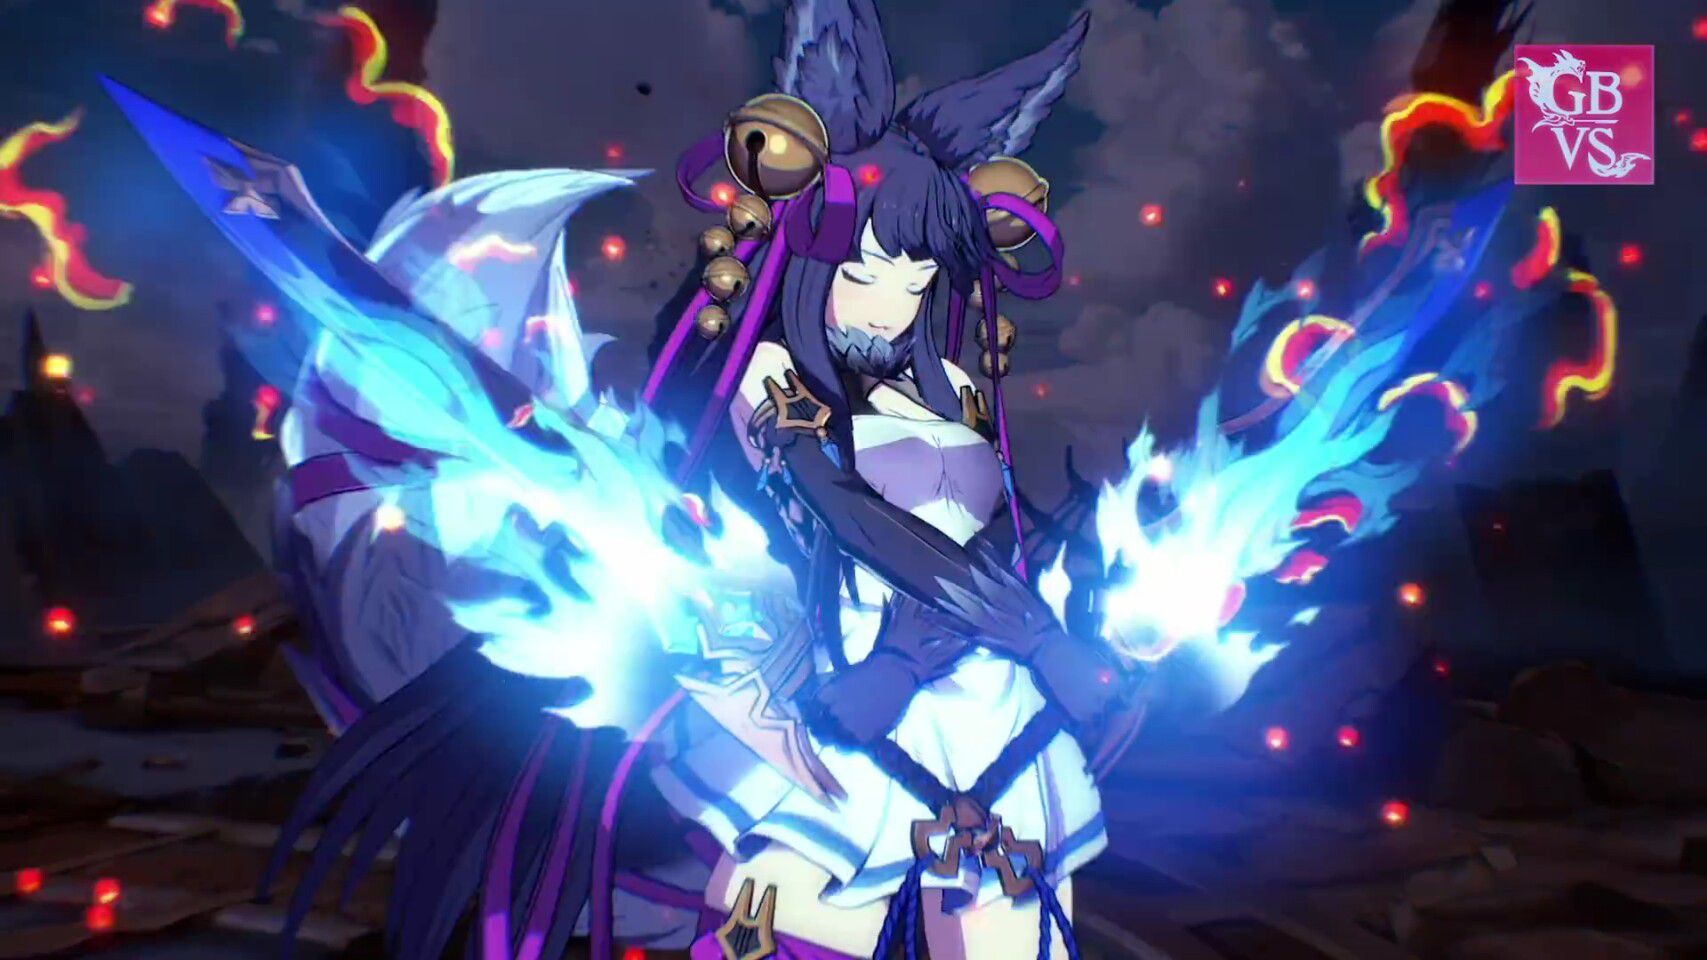 [Granblue Fantasy Versus] Erotic PV that Yuel's erotic spats become fully seen! 11